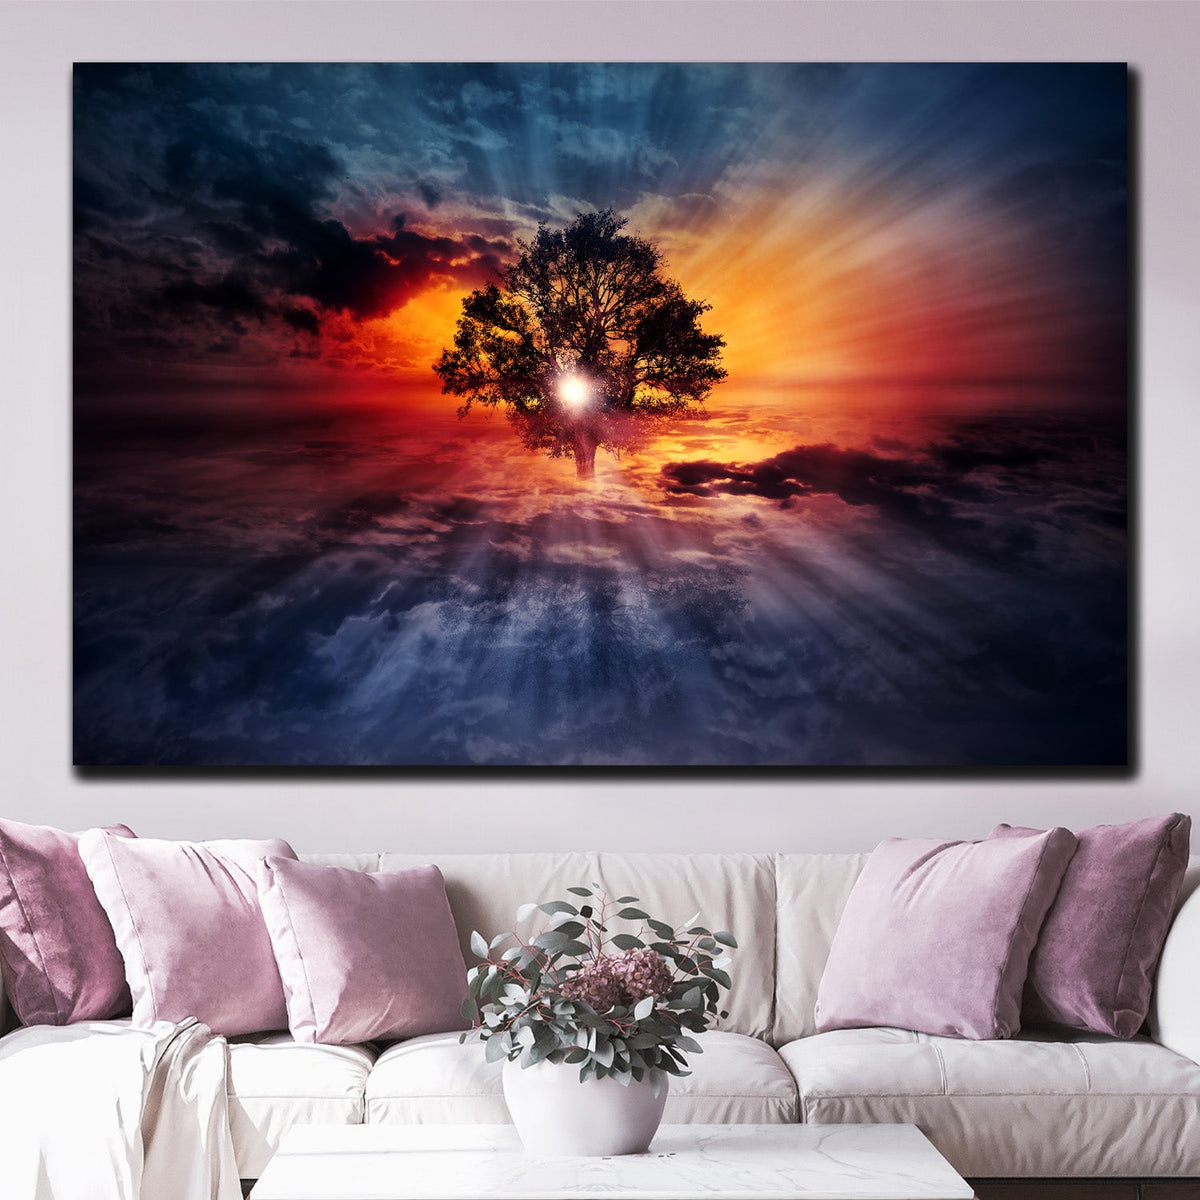 https://cdn.shopify.com/s/files/1/0387/9986/8044/products/GlowingTreeCanvasArtprintStretched-4.jpg